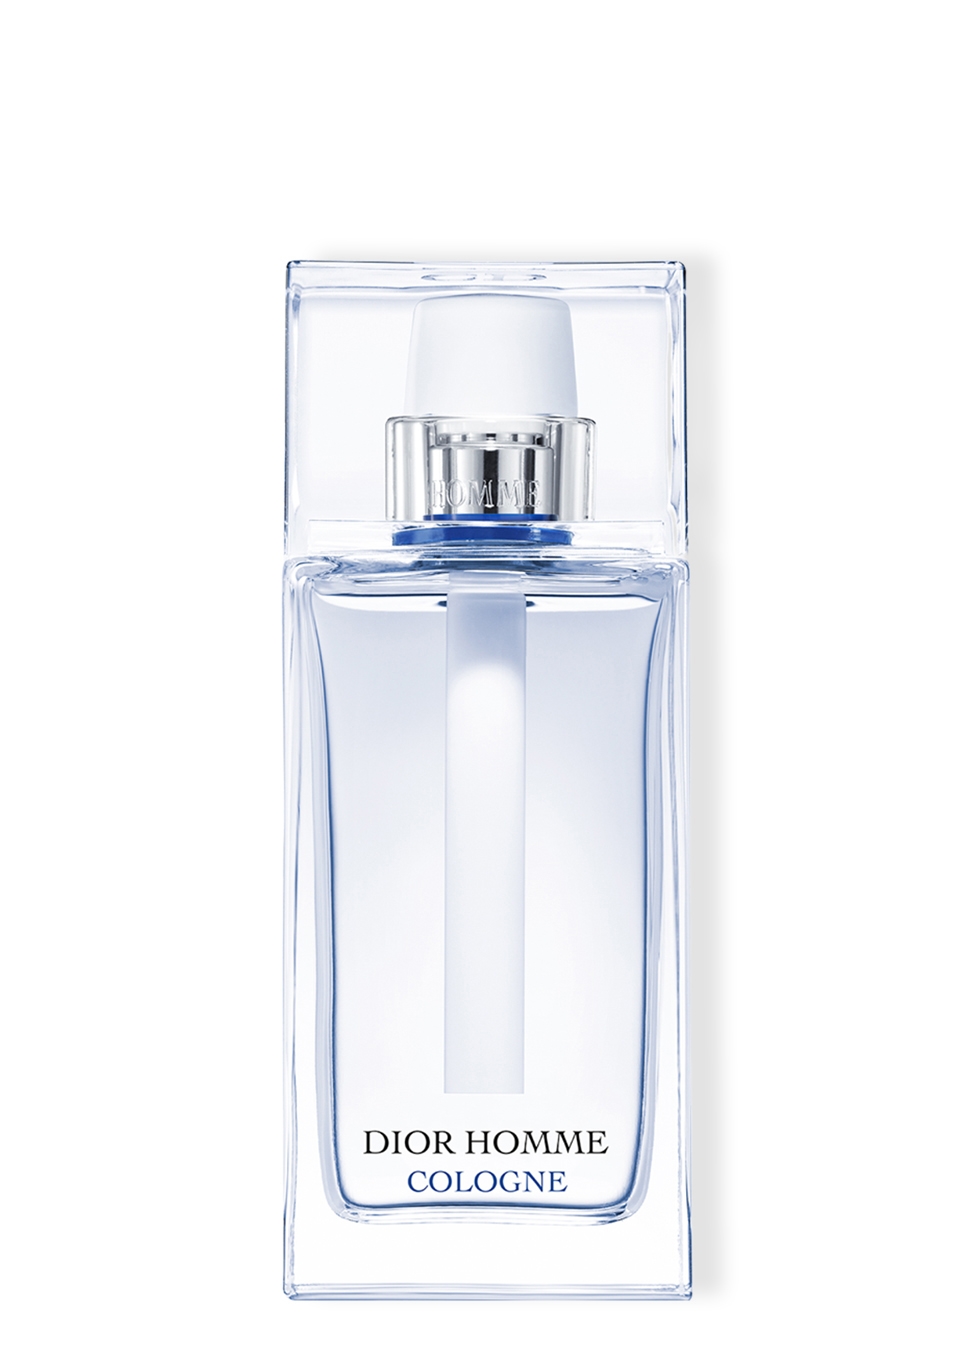 dior homme cologne 75ml